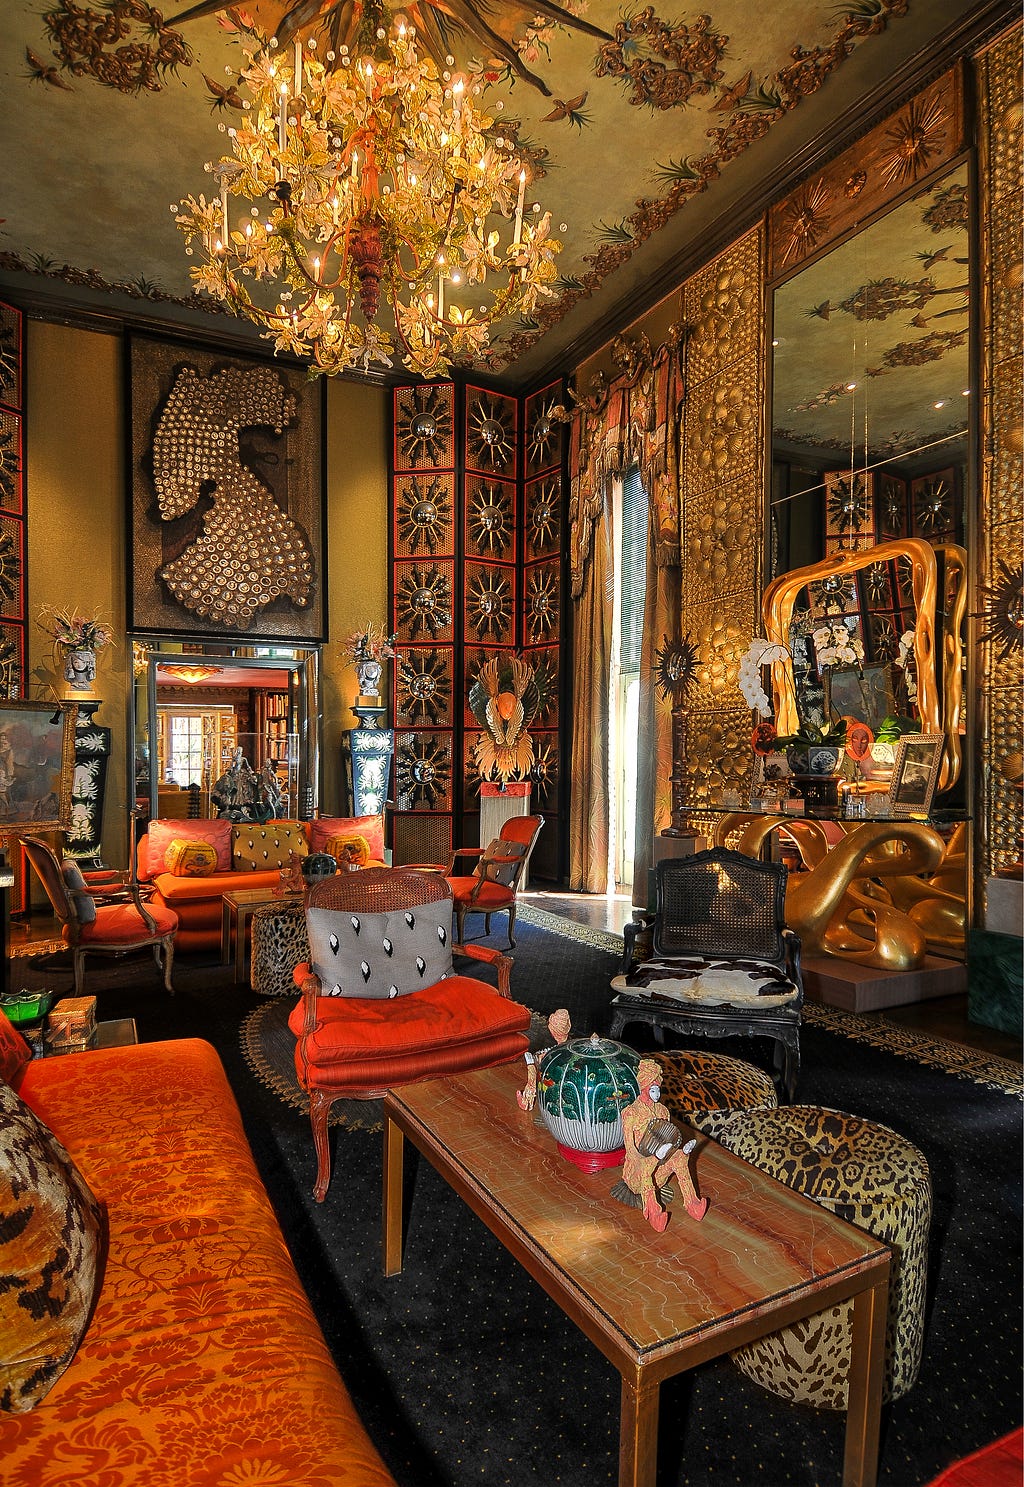 Tony Duquette’s Dawnridge interior. Features gold panels with red furnishings, mirrors, patterened fabrics and art.